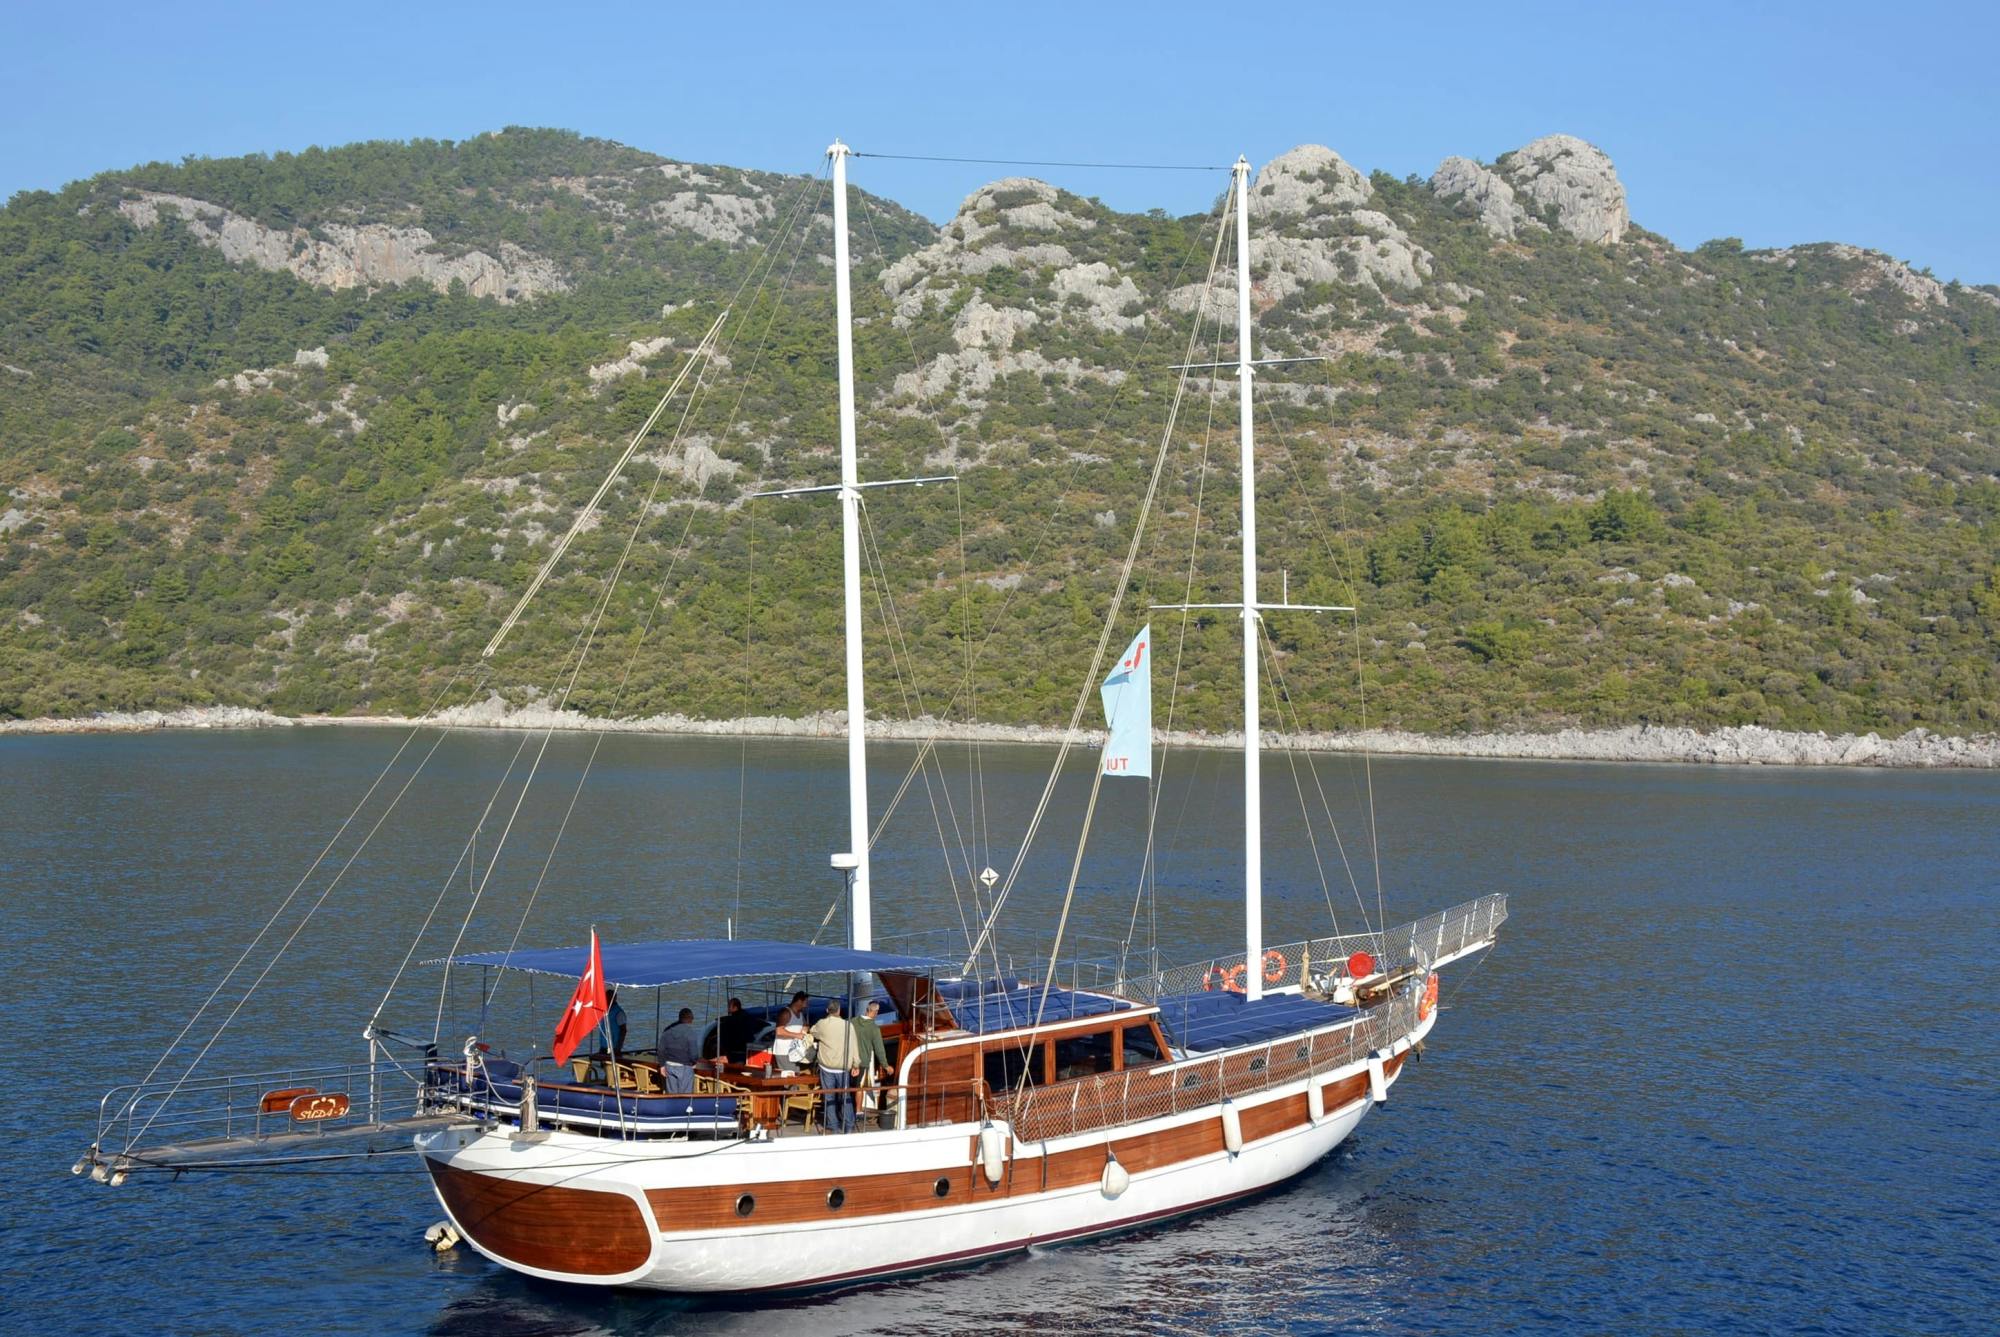 Family-friendly Gulet Boat Cruise from Marmaris